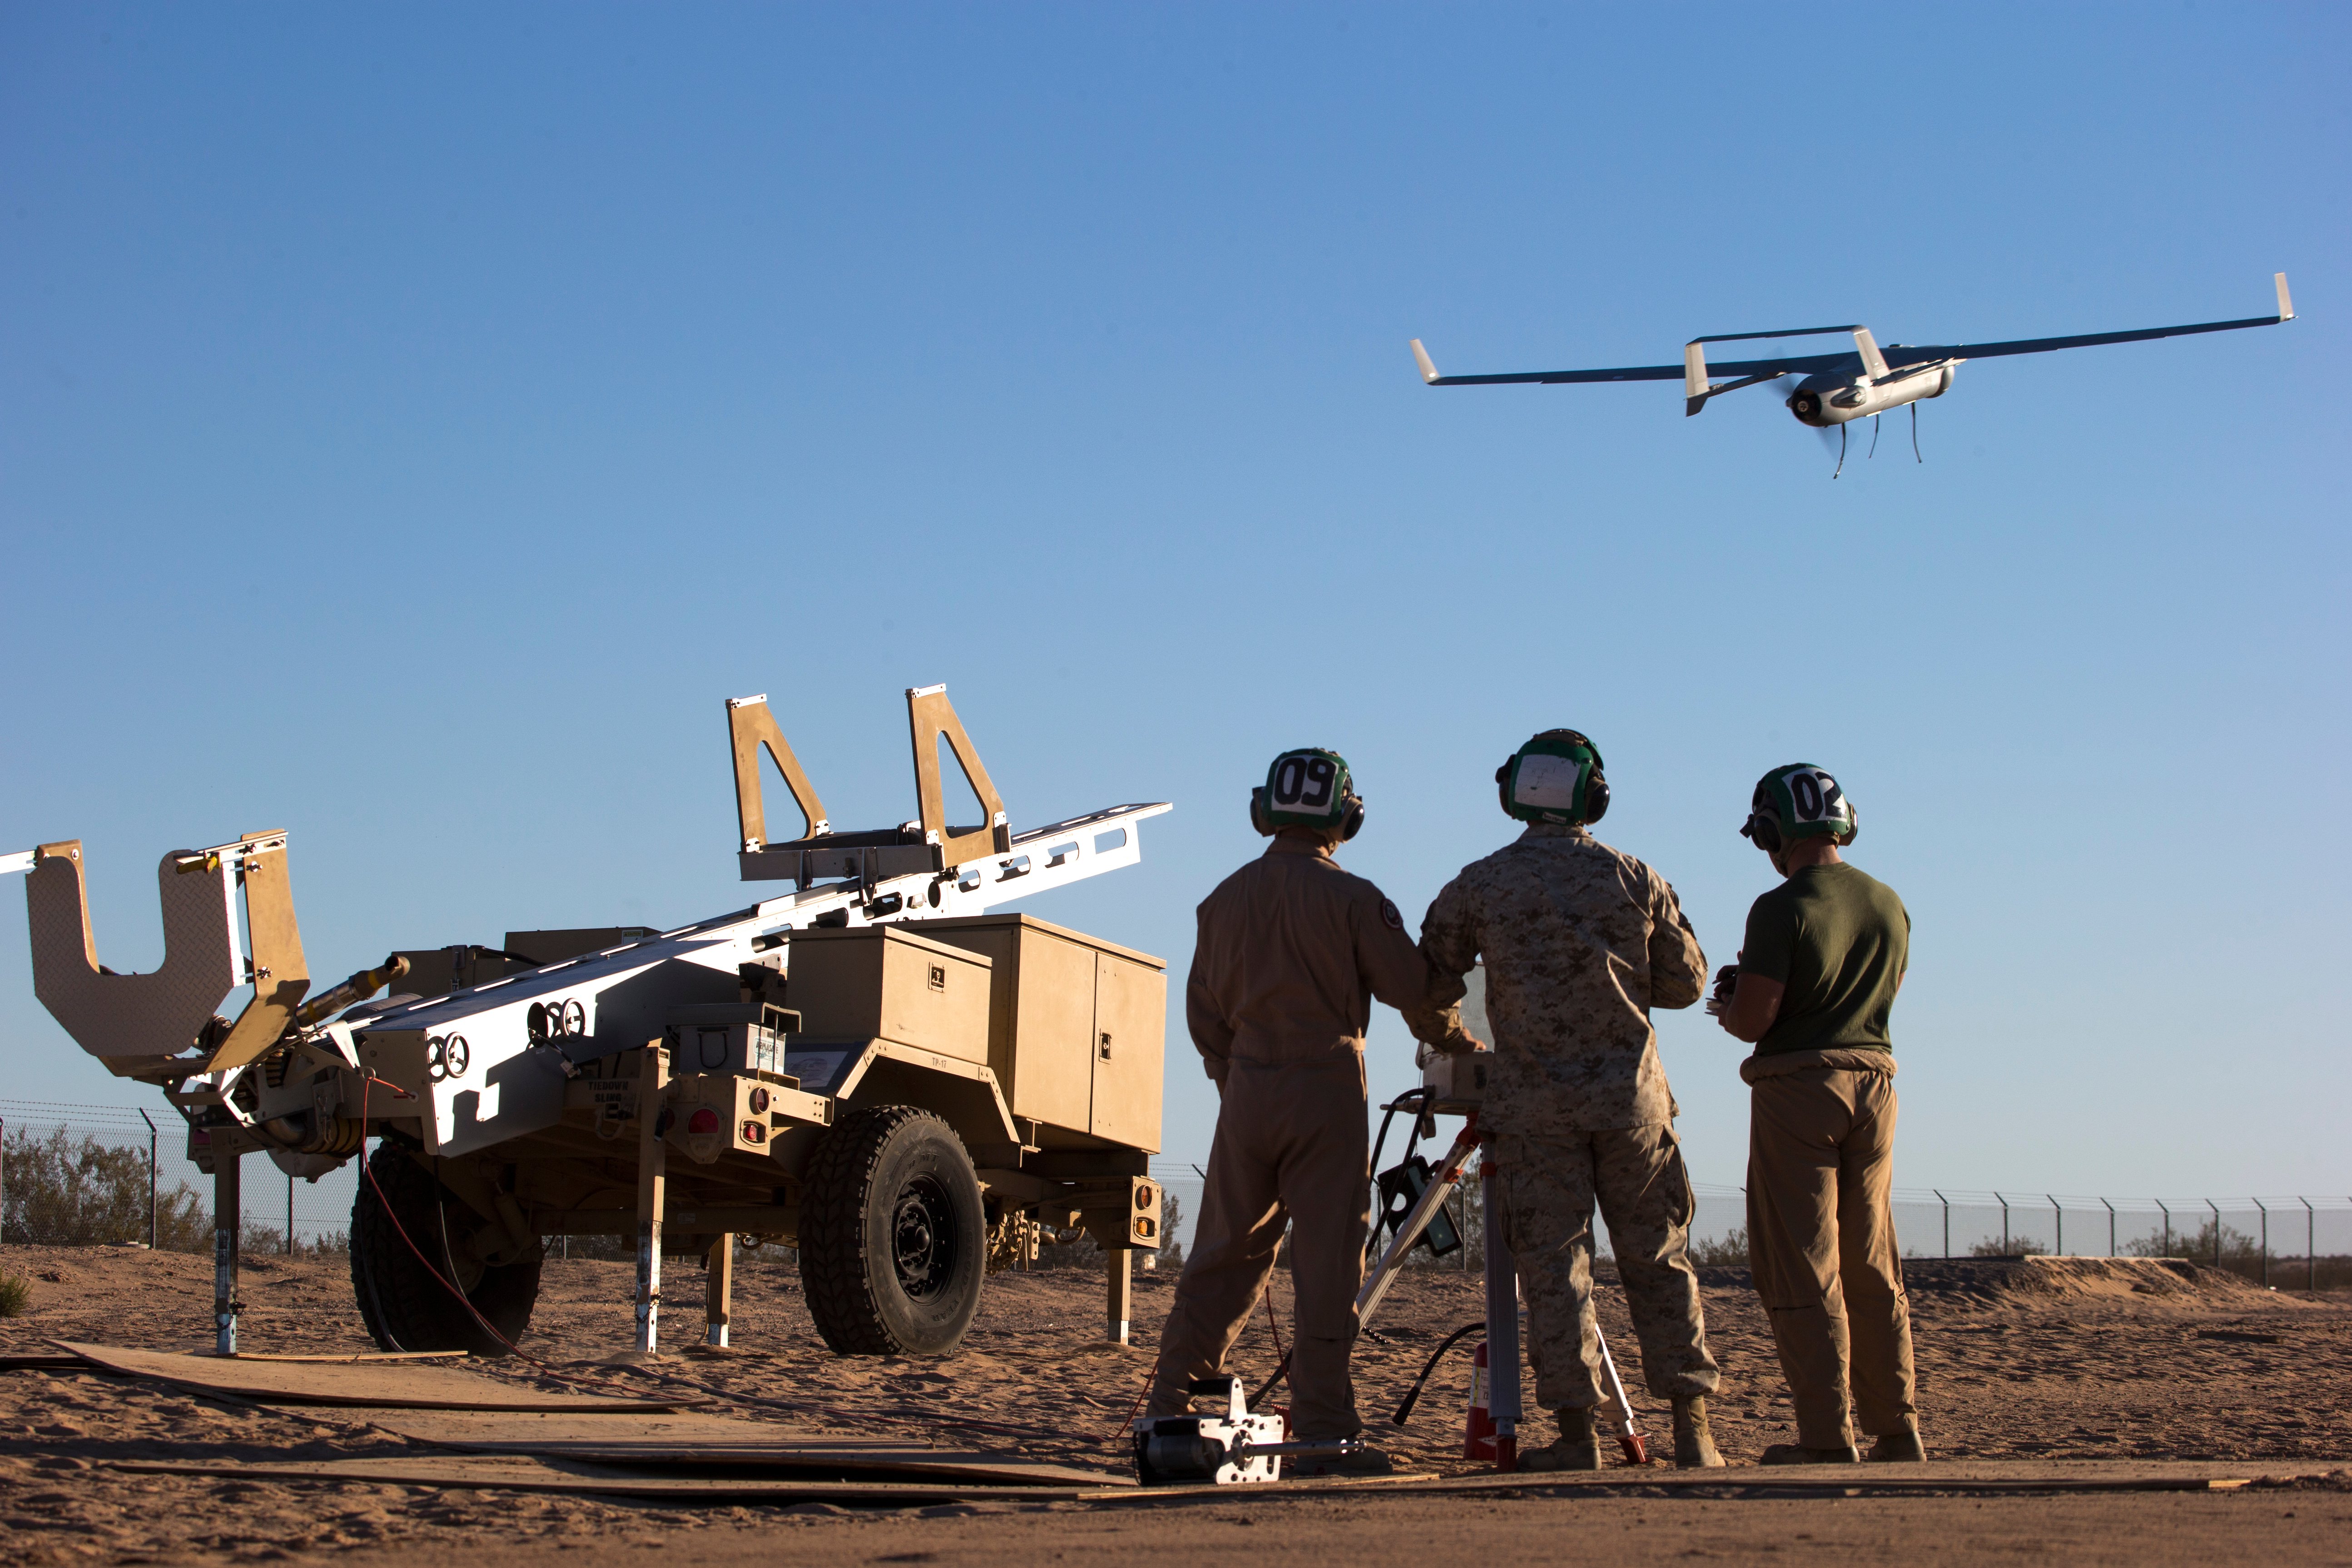 U.S. Marines with Marine Unmanned Aerial Vehicle Squadron (VMU) 2 launch a RQ-21A Blackjack for Assault Support Tactics 2 at Canon Air Defense Complex (P111), Yuma, Ariz., Oct. 12, 2016. This exercise was part of Weapons and Tactics Instructors course (WTI) 1-17, a seven week training event hosted by MAWTS-1 cadre. MAWTS-1 provides standardized tactical training and certification of unit instructor qualifications to support Marine Aviation Training and Readiness and assists in developing and employing aviation weapons and tactics. (U.S. Marine Corps photo by Cpl. AaronJames Vinculado, MAWTS-1)